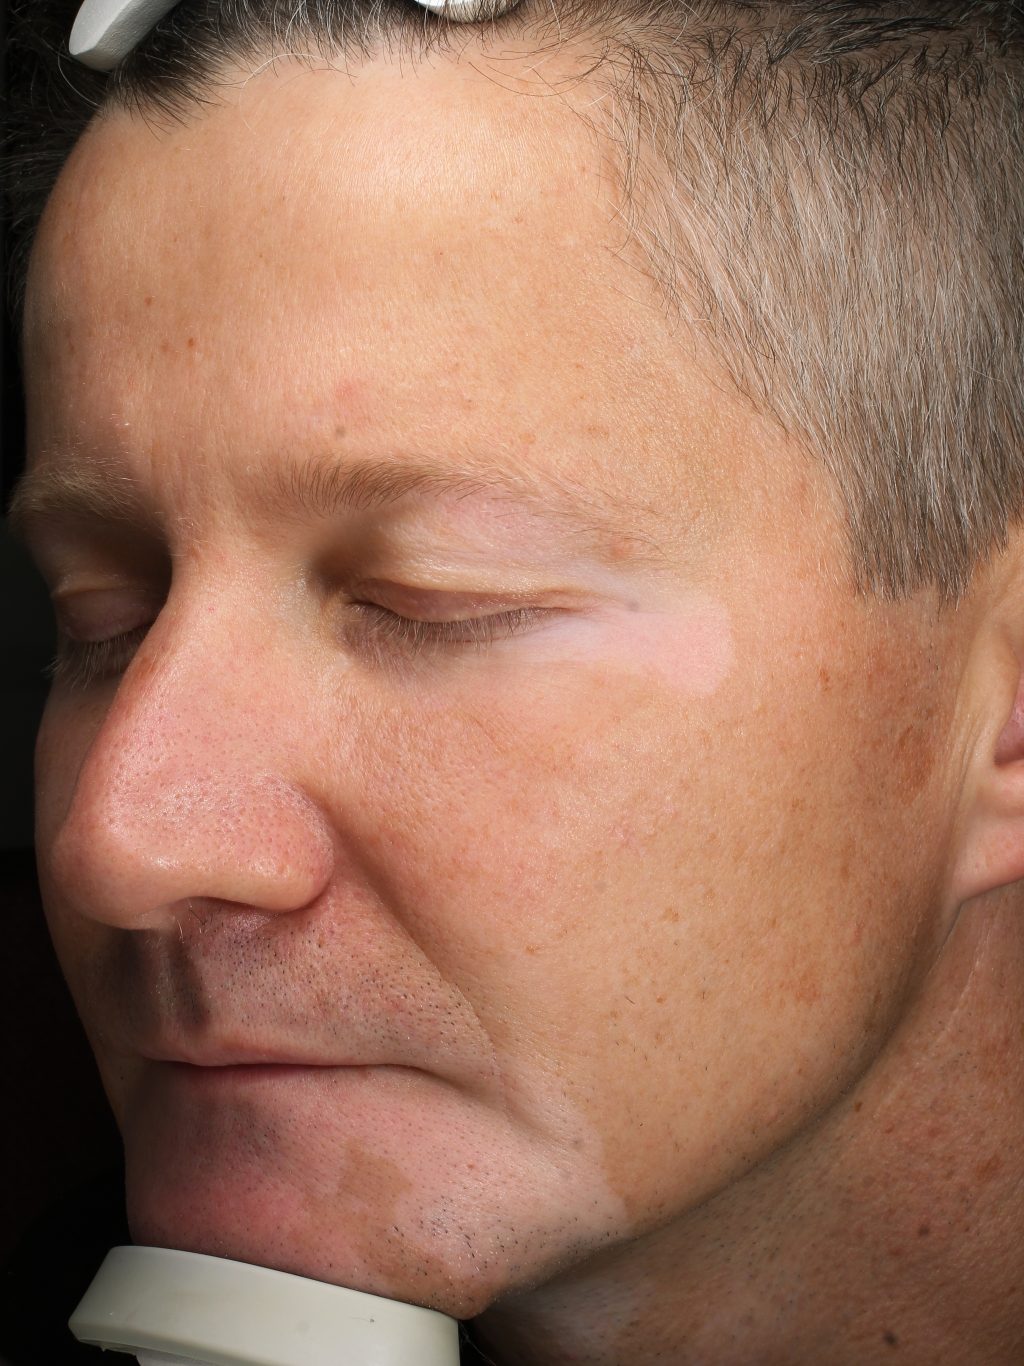 A close-up photo of Dr. Swistun's face in which the texture and pigmentation of his skin are visible